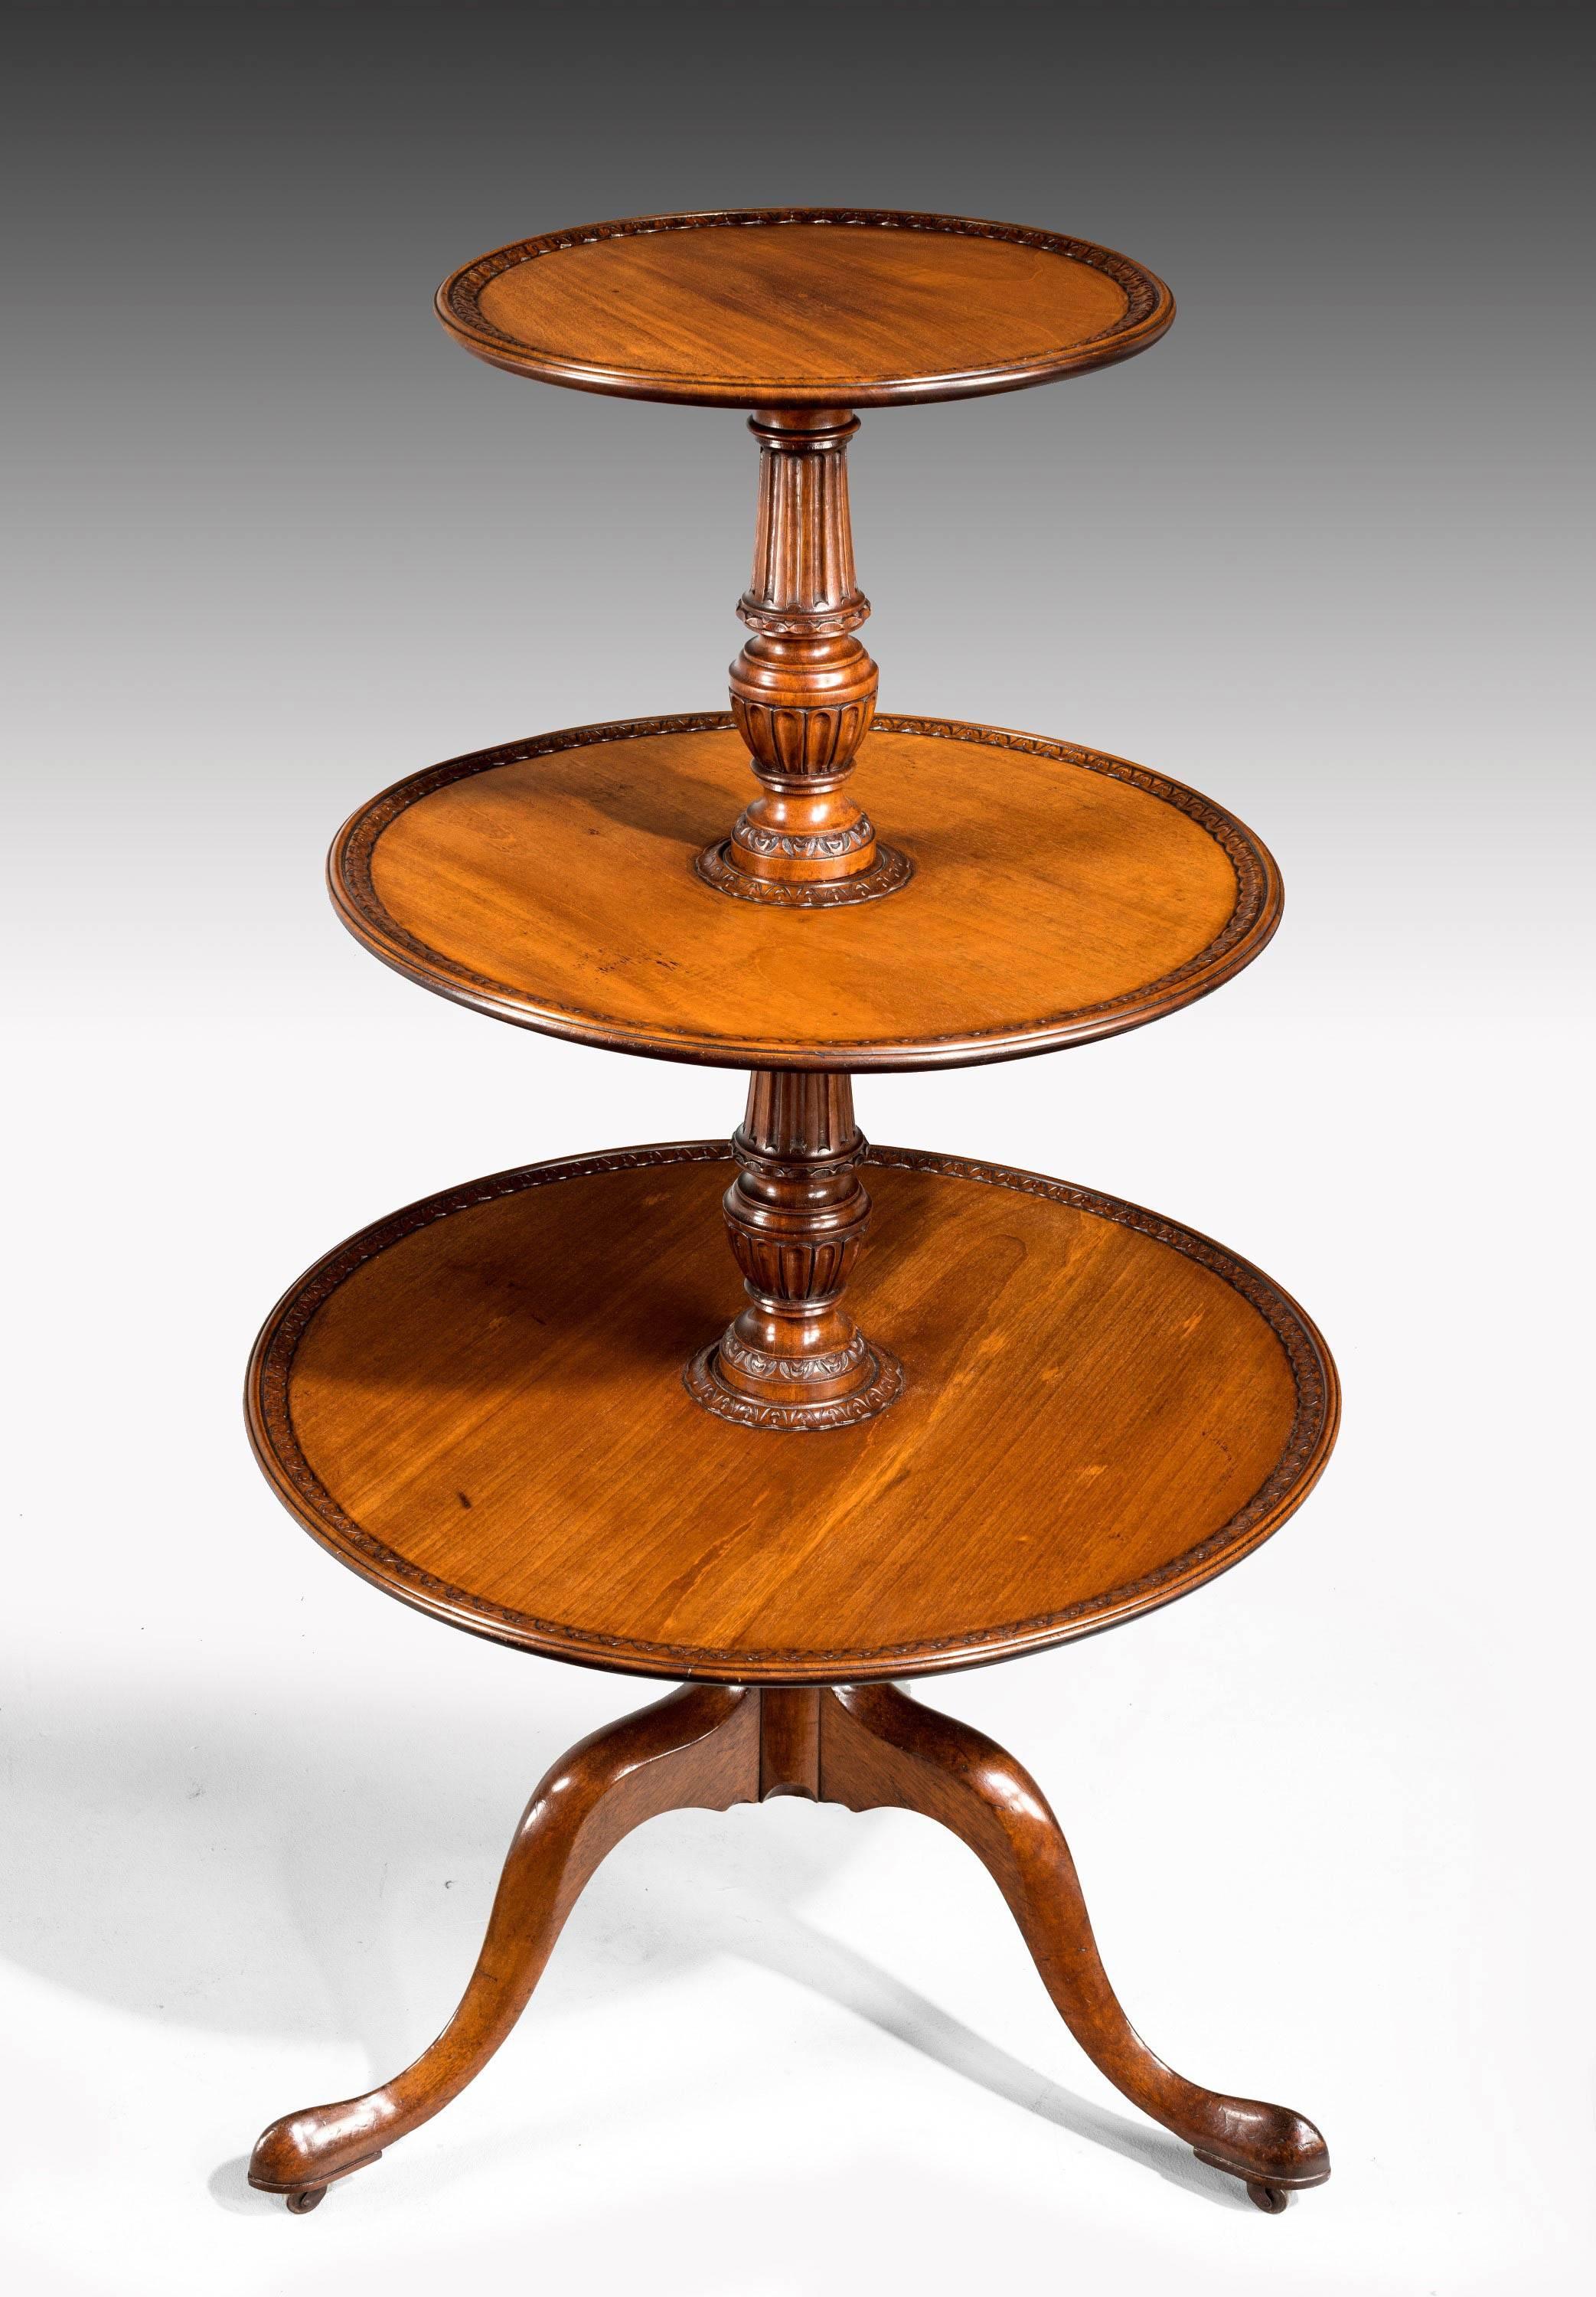 A George III period mahogany three tier dumbwaiter with unusual well carved detail to the edge of the trays and central stem. Cabriole legs. Excellent condition.

N.